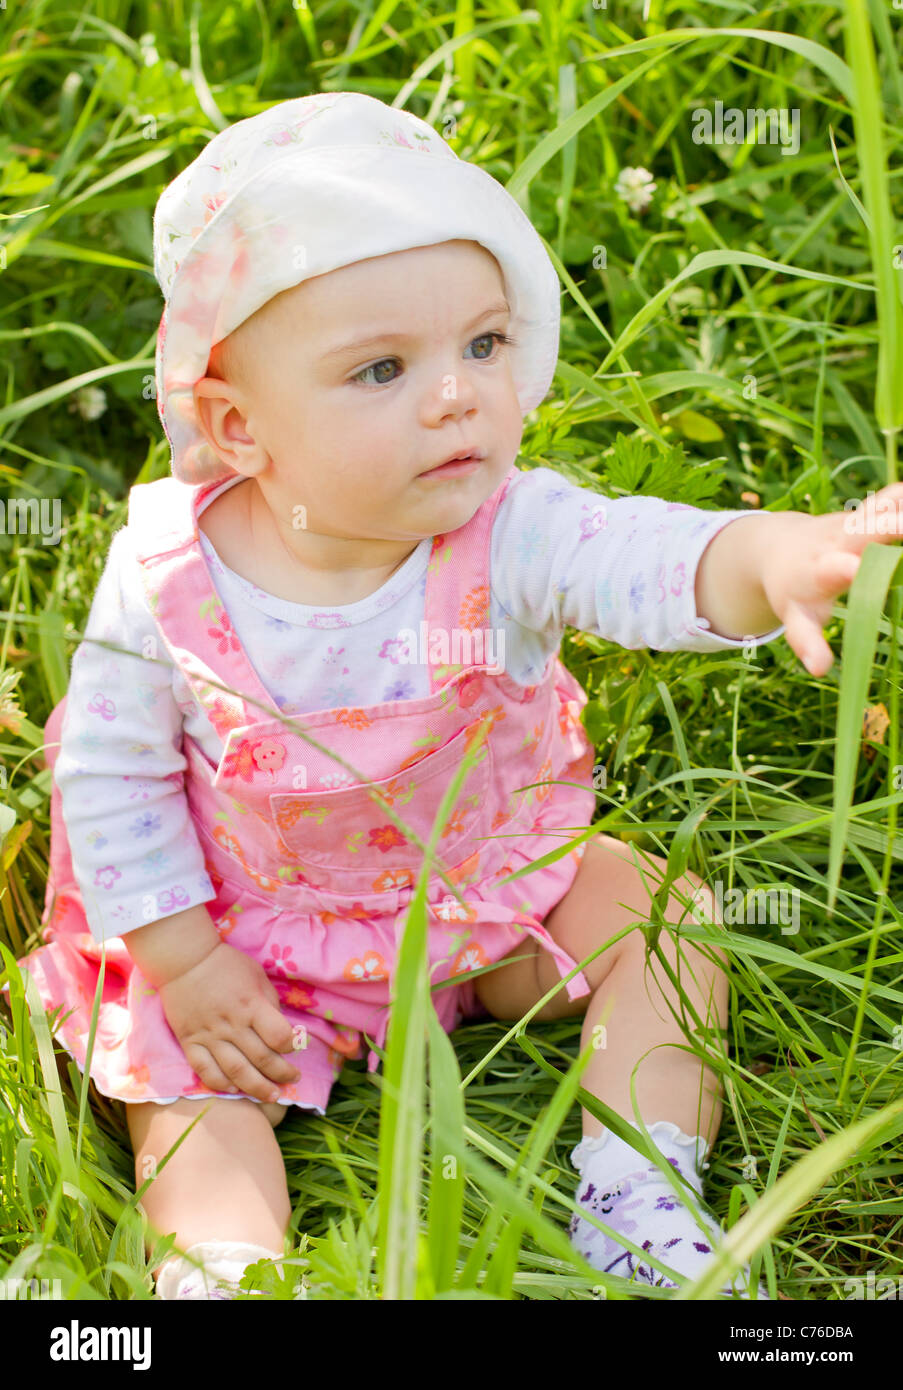 Curieux baby girl on grass Banque D'Images